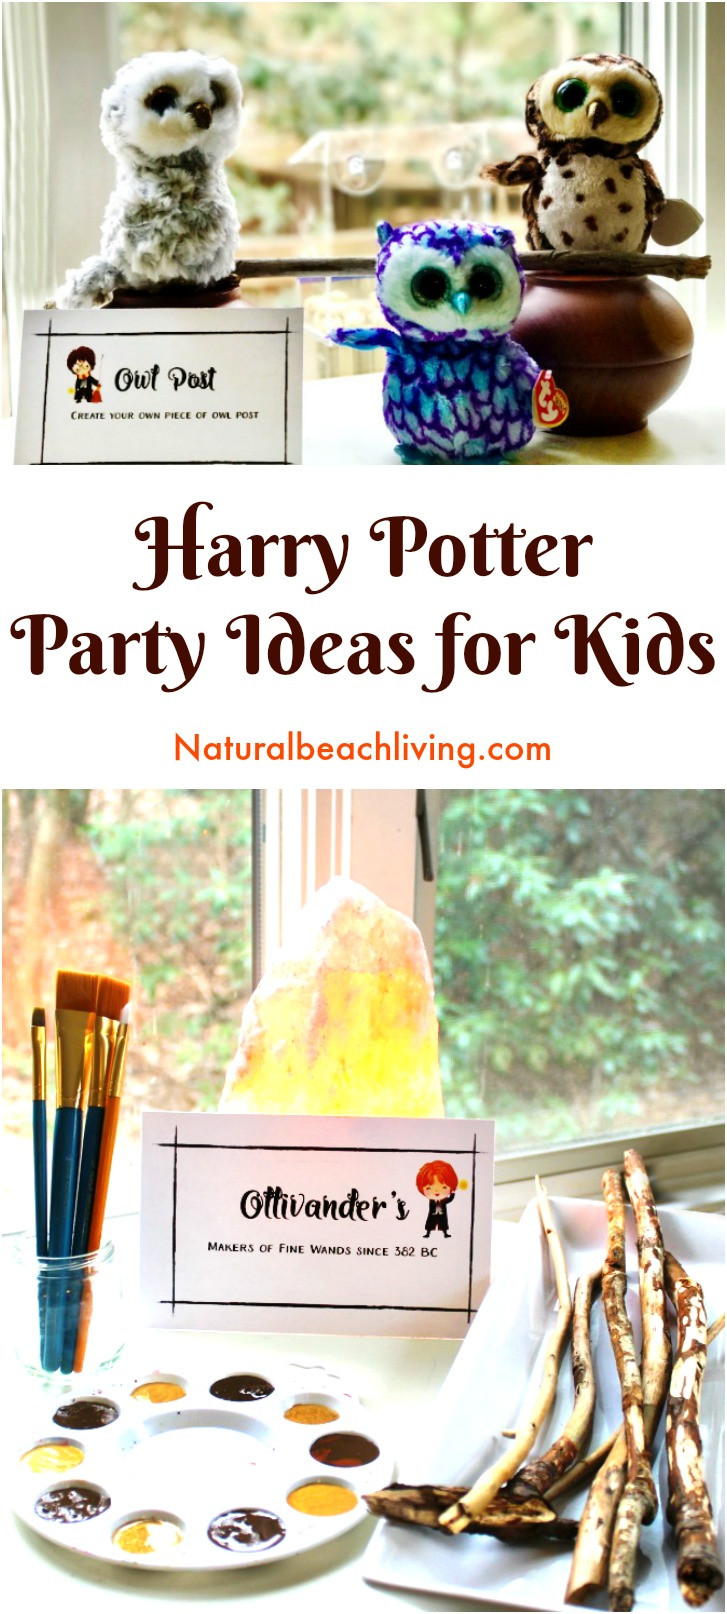 Harry Potter Birthday Party Ideas
 The Best Harry Potter Party Ideas and Printables for Kids